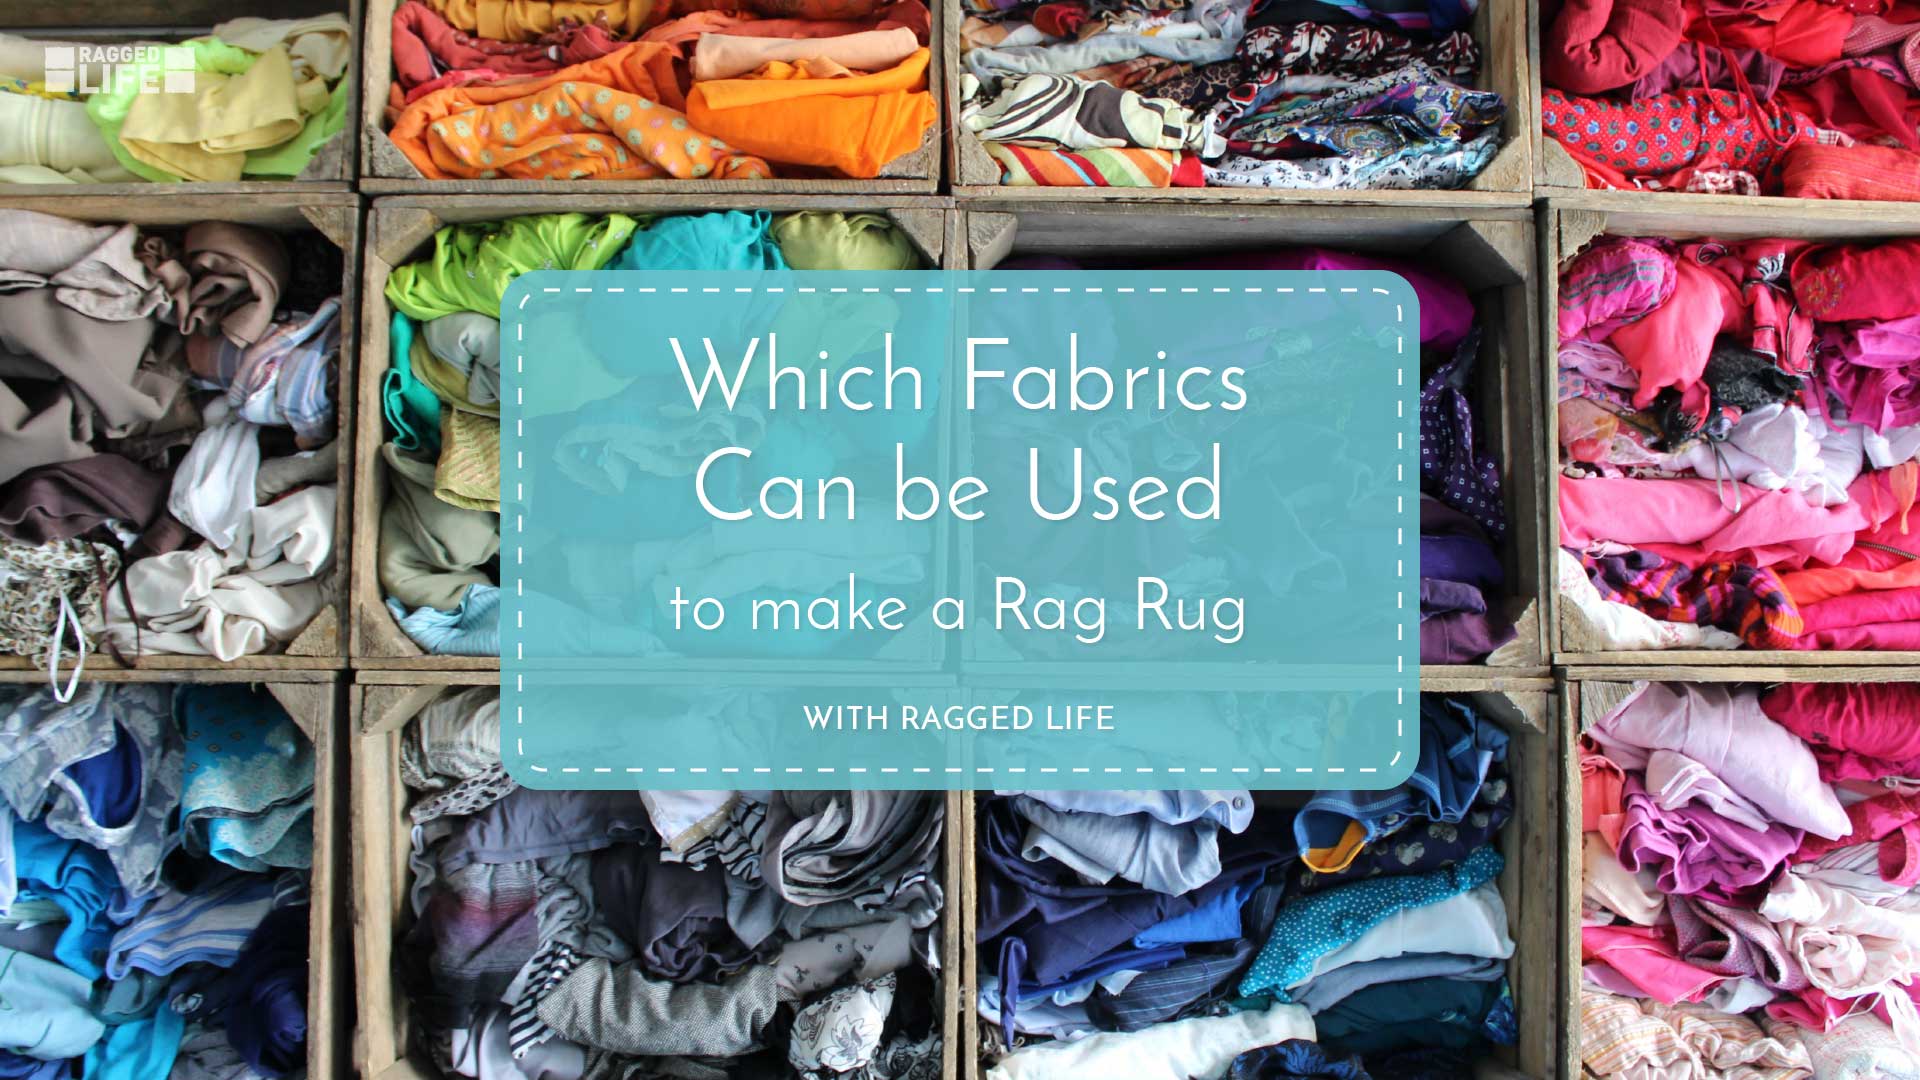 What Fabrics can be used to make a rag rug video